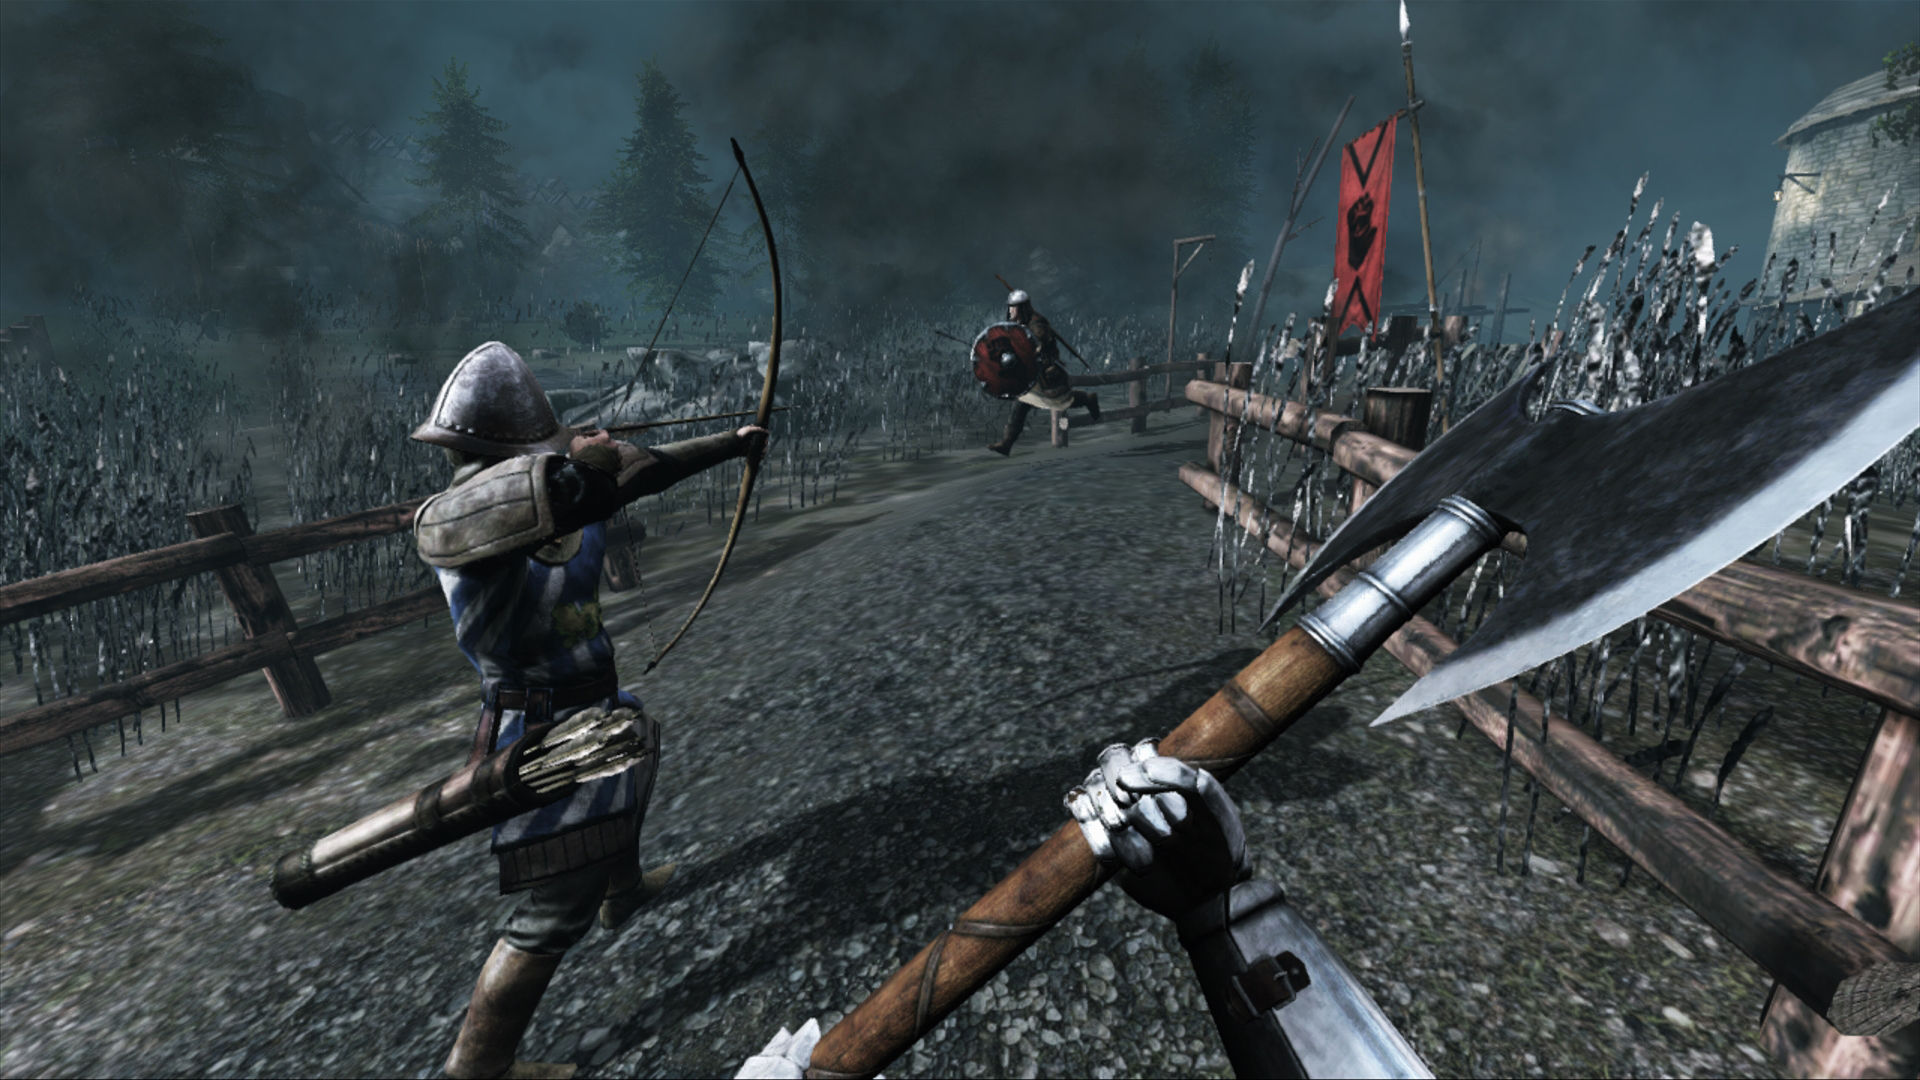 Chivalry: Medieval Warfare Wallpapers